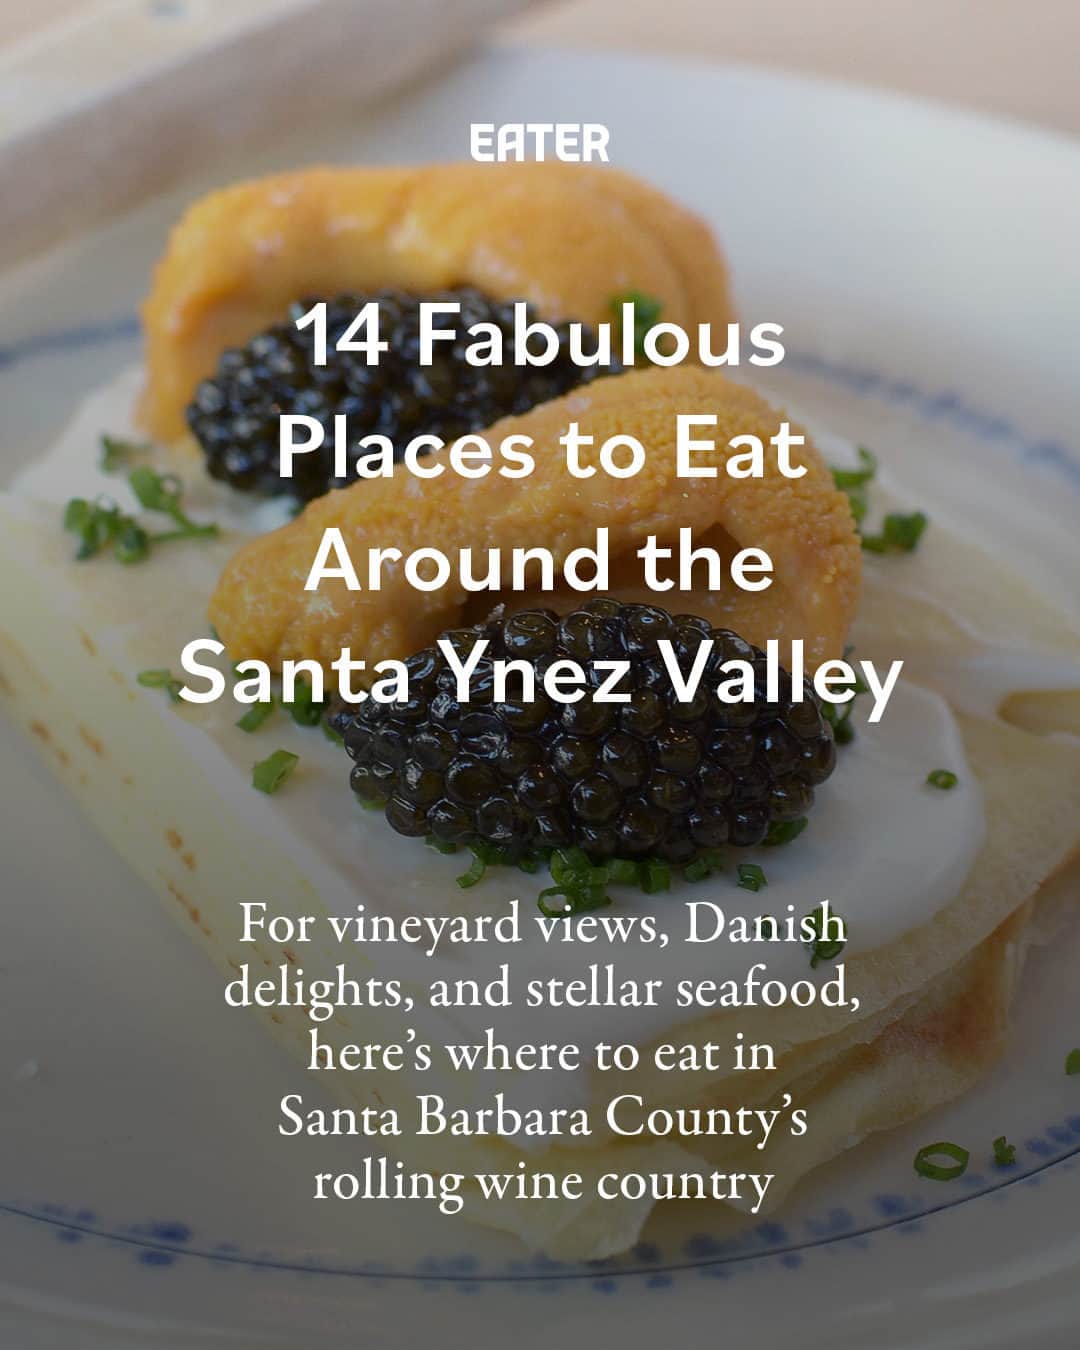 Eater LAのインスタグラム：「It’s never a bad time to head north to the Santa Ynez Valley for a weekend of wine tasting, superb eating, and all-around relaxation. The Central Coast wine enclave is abuzz with a slew of new restaurants, tasting rooms, luxury lodging, and even a sky-high zip line opening in the region.   For flame-licked steaks grilled Santa Maria style, traditional Danish breakfast, and everything in between, tap the link in bio for 14 fabulous places to eat around the Santa Ynez Valley by Eater LA senior reporter/editor Cathy Chaplin (@gastronomyblog).  📸: @gastronomyblog」